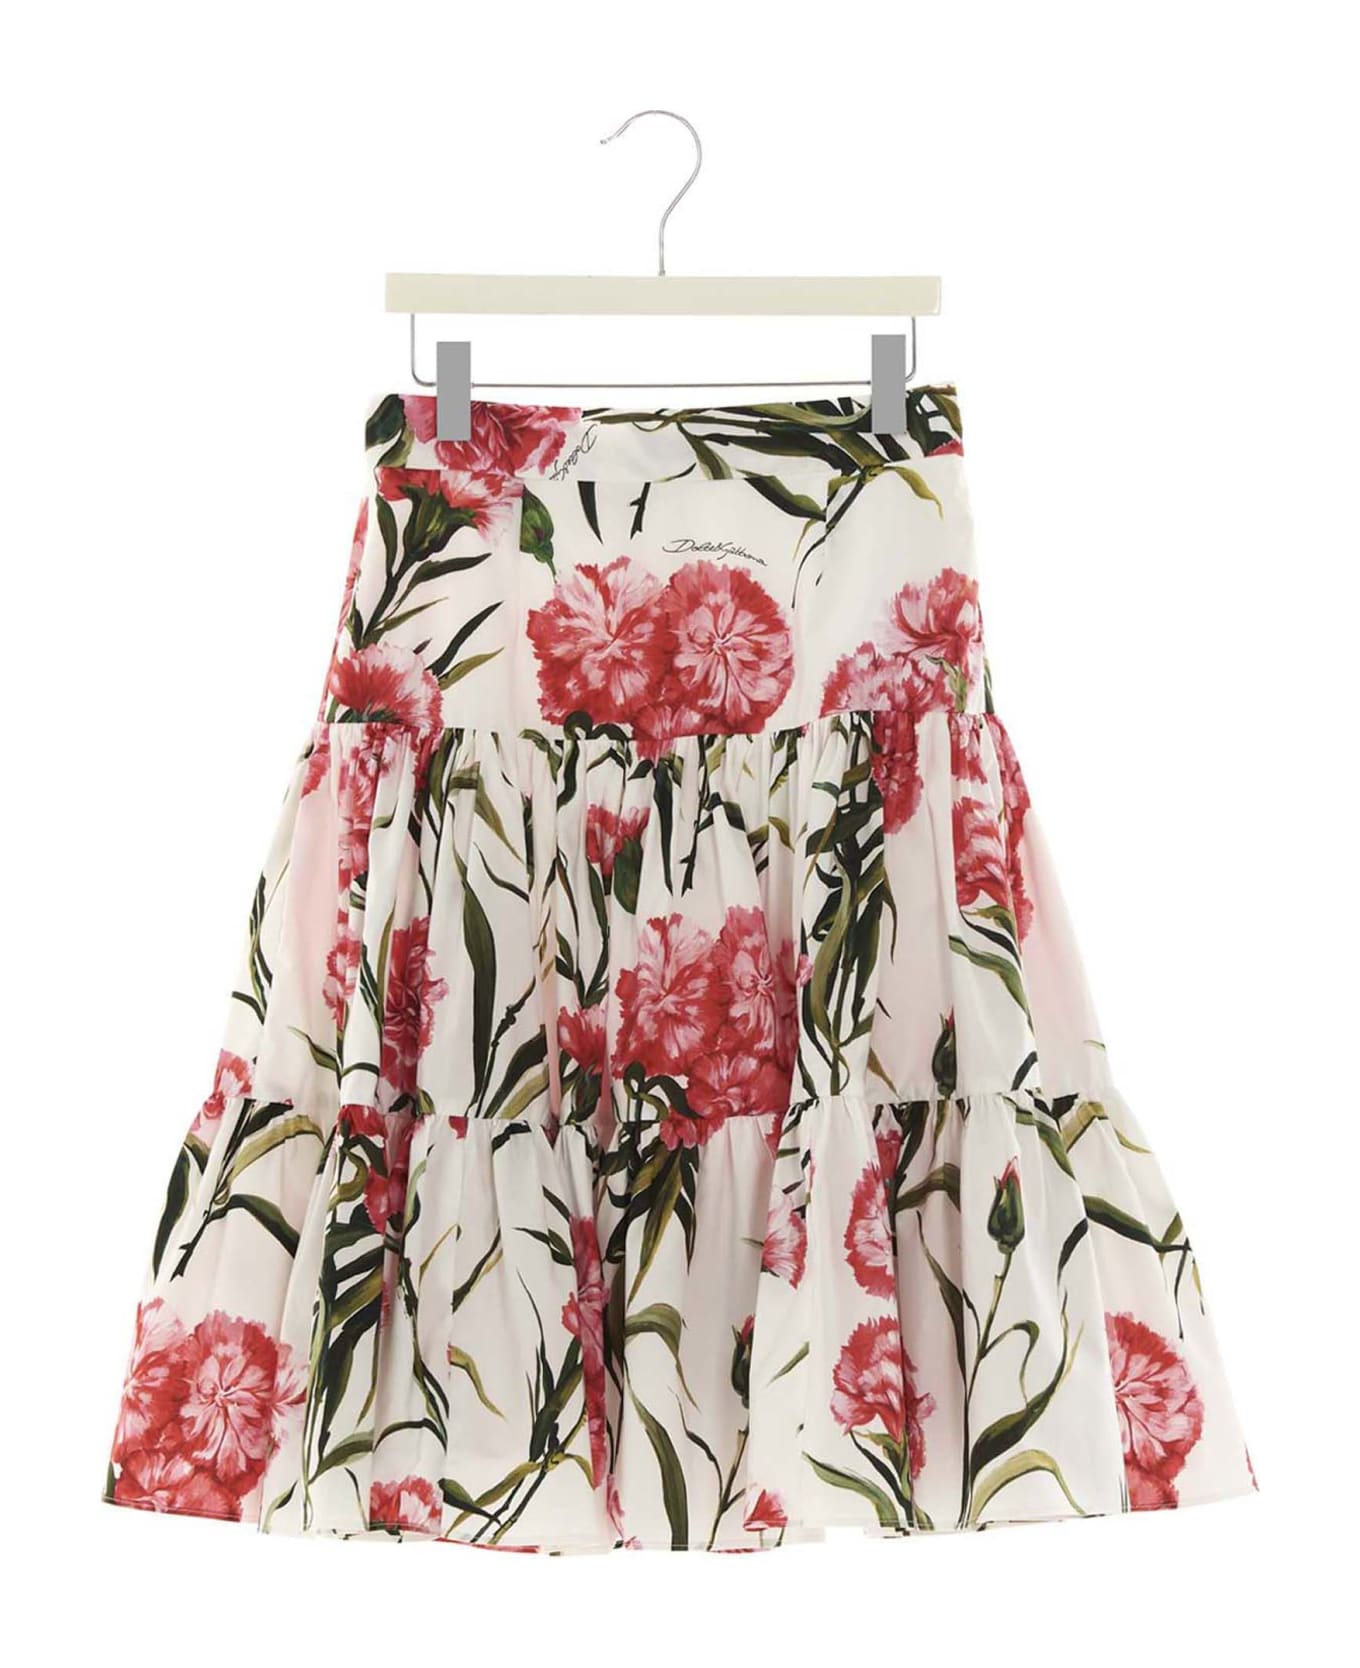 Dolce & Gabbana Floral Skirt - Multicolor ボトムス